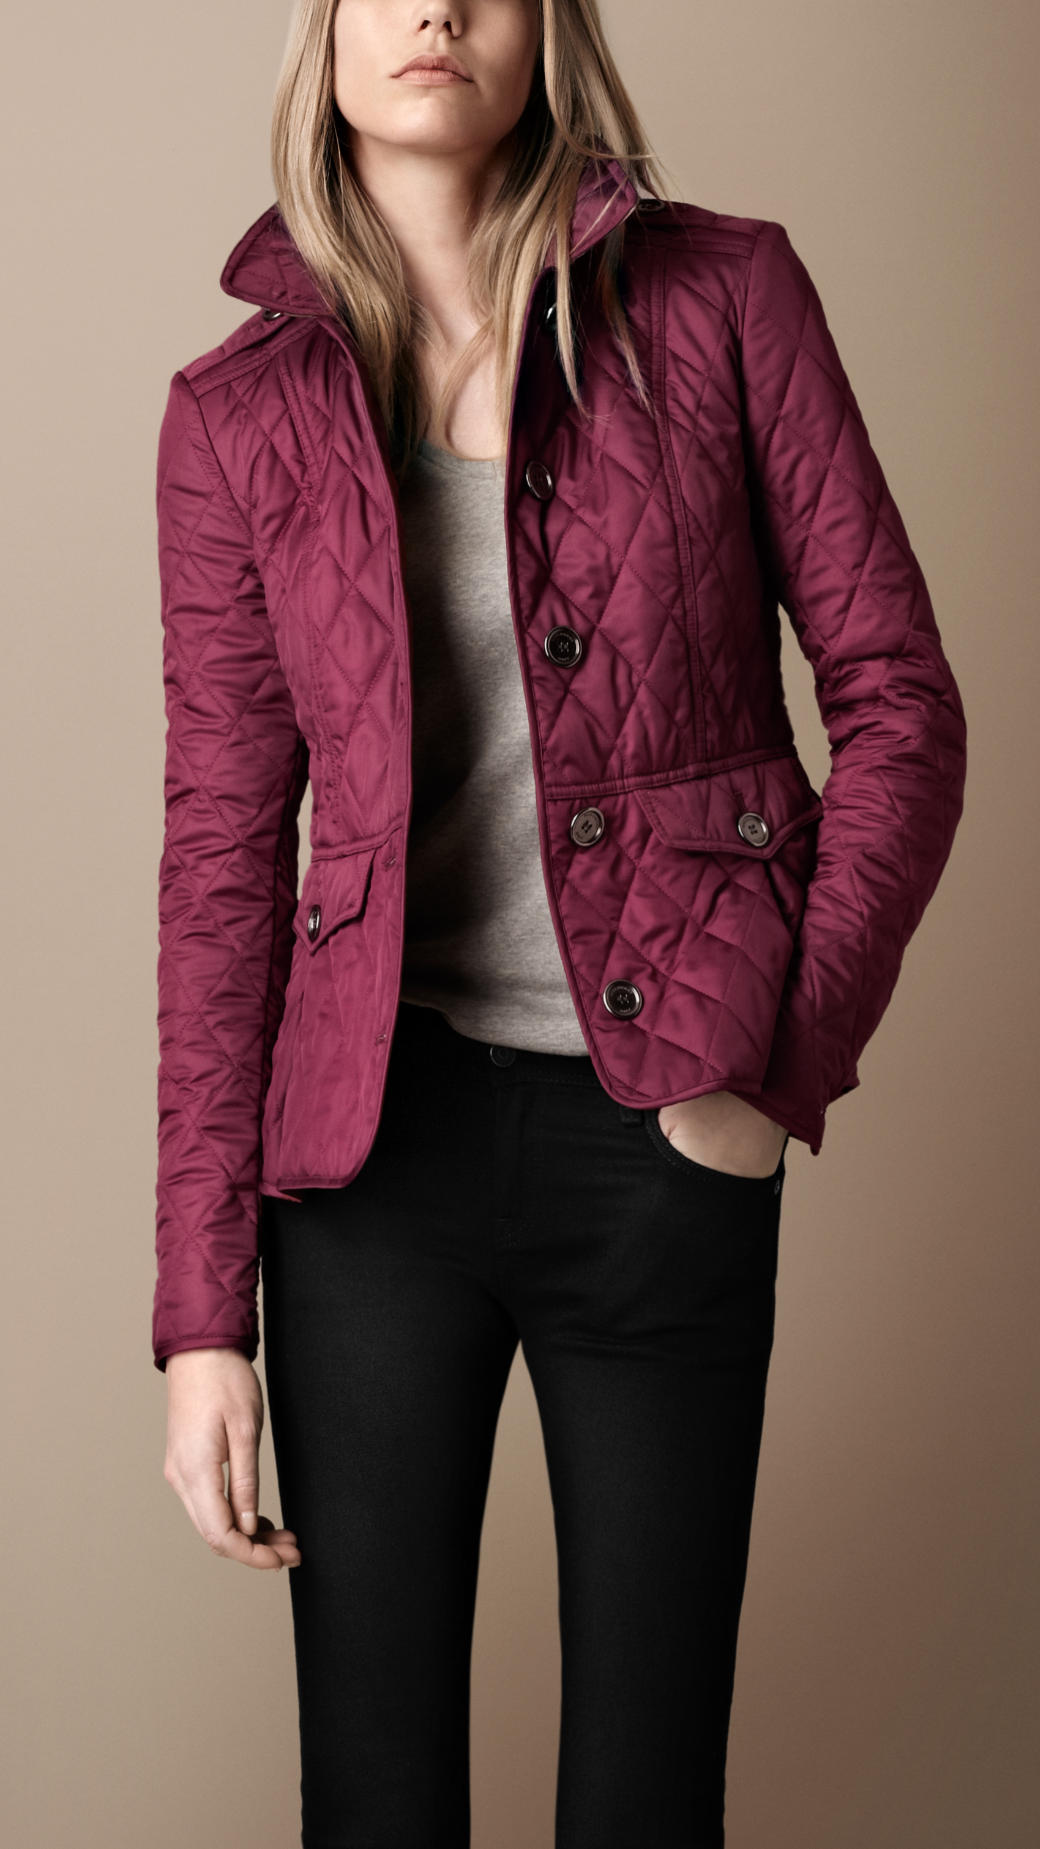 Lyst - Burberry Brit Fitted Quilted Jacket in Purple